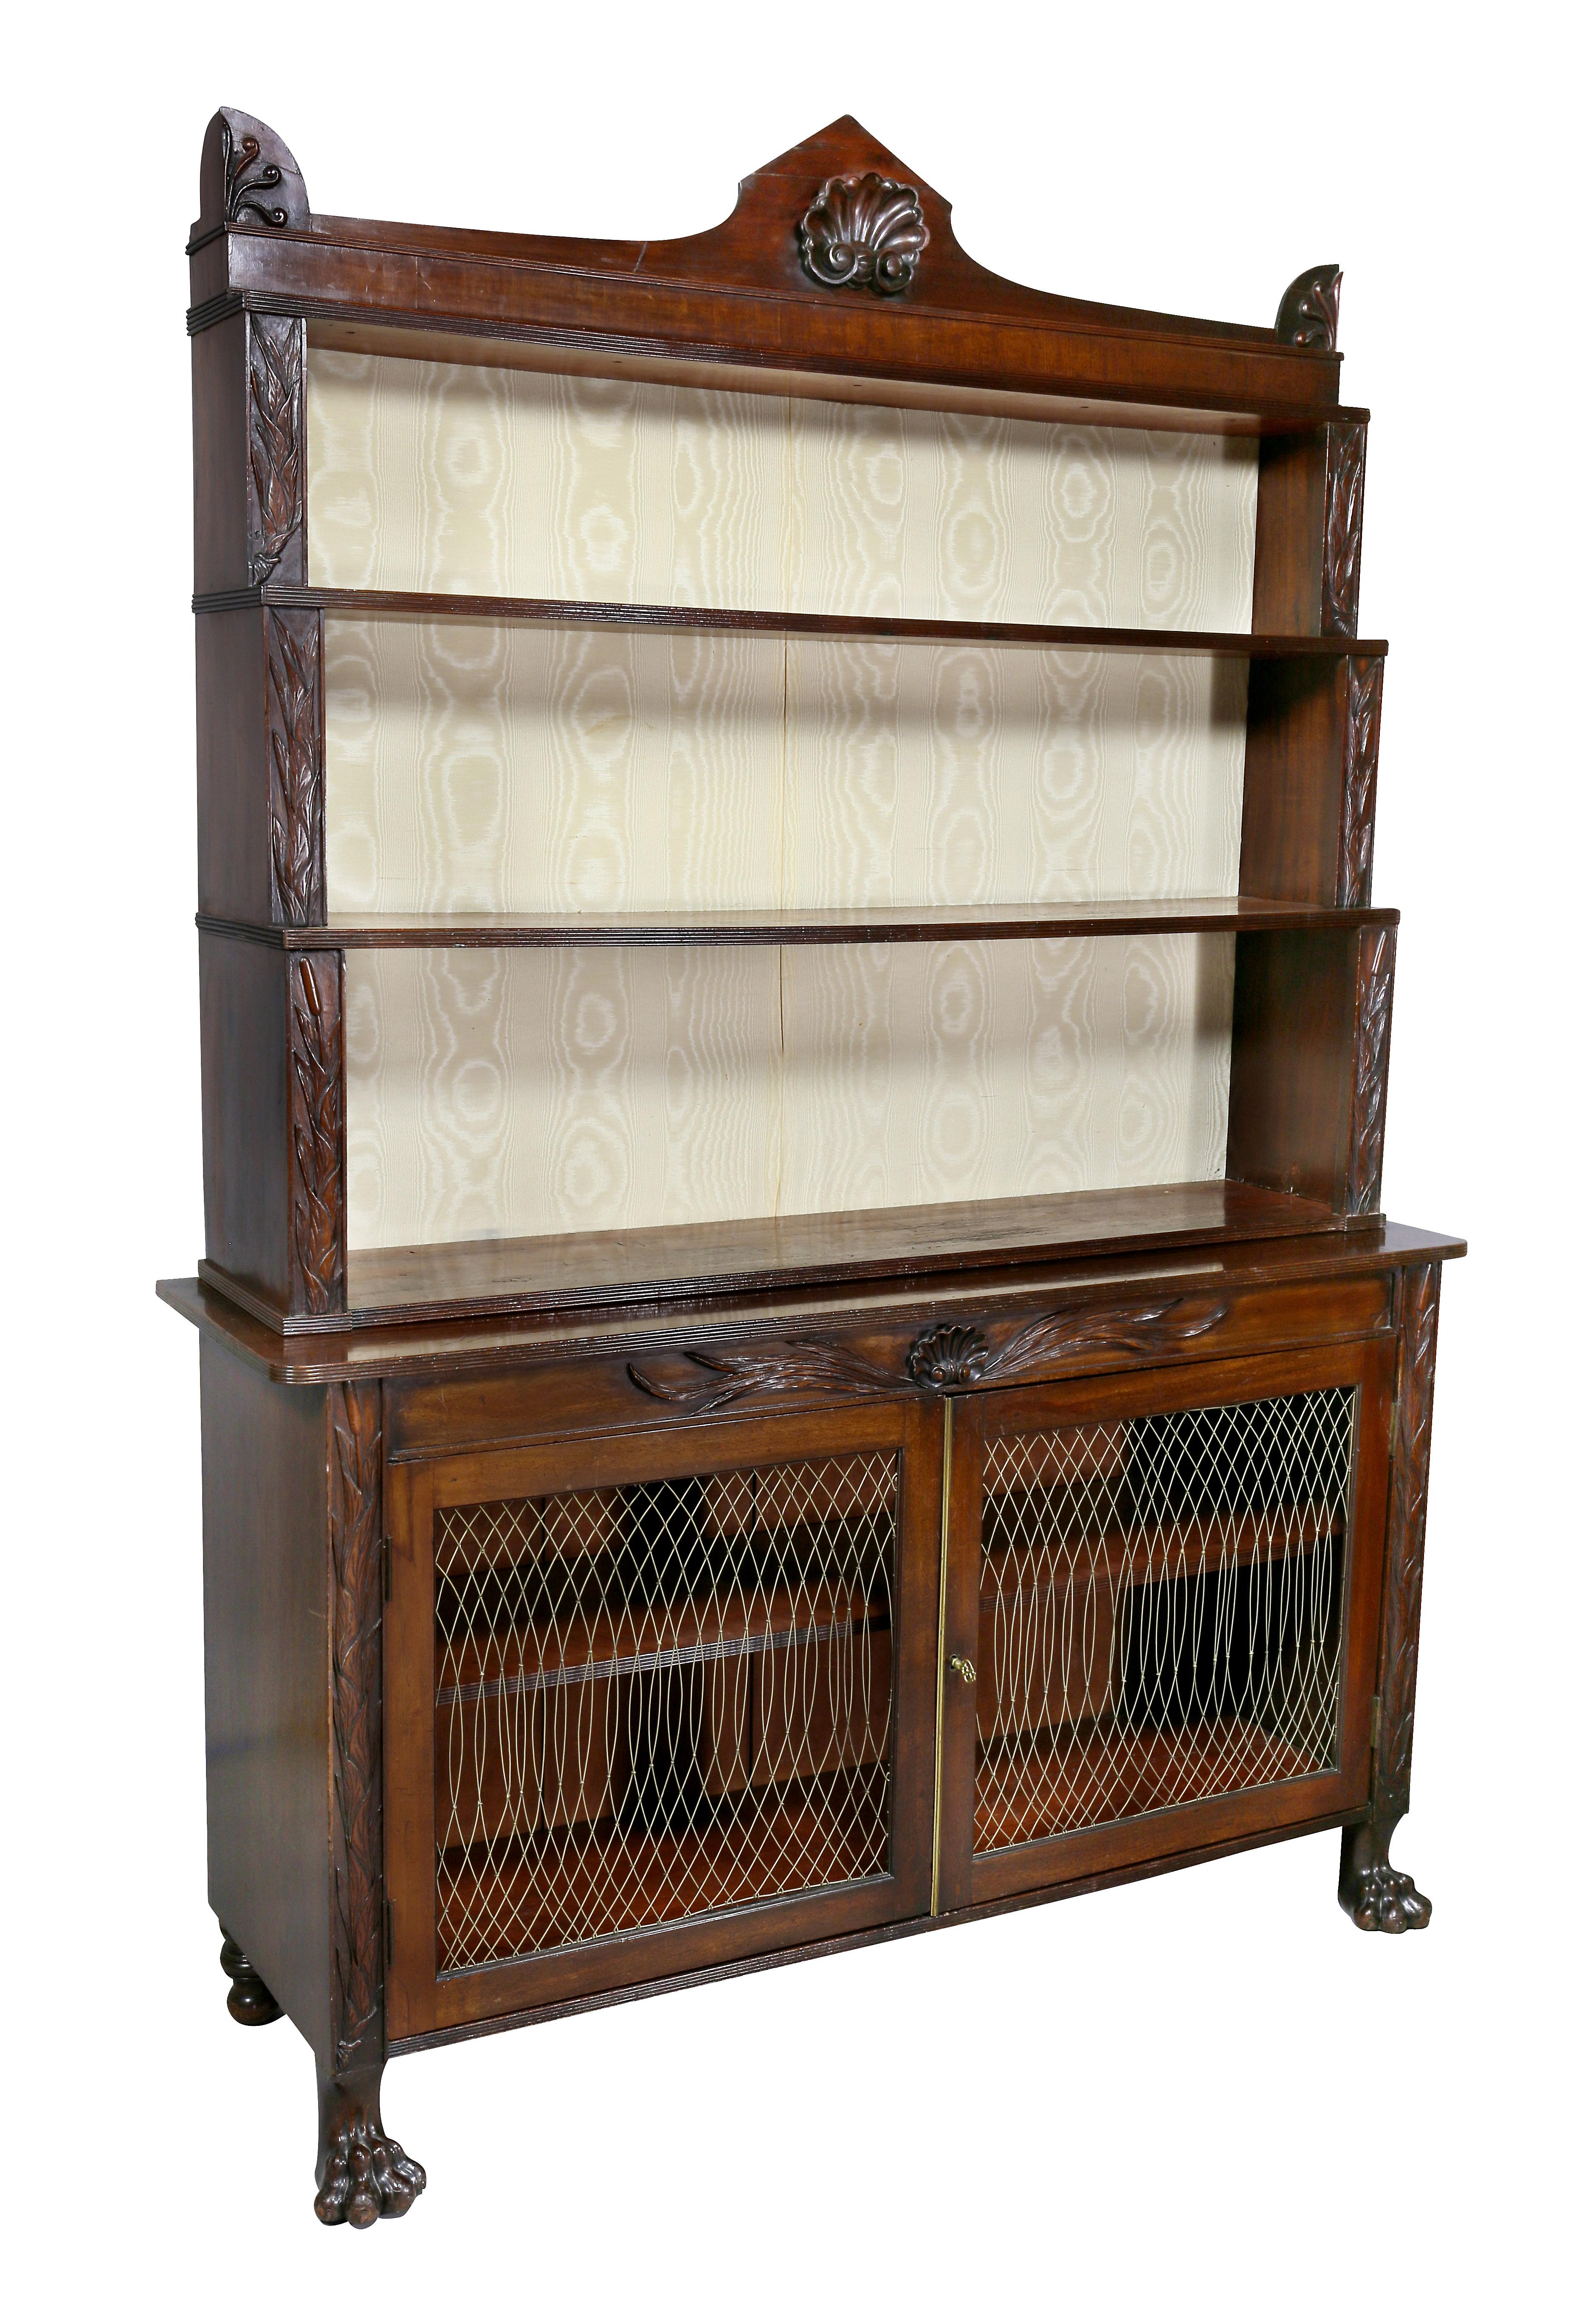 With shelf superstructure with back panel with central shell carving flanked by anthemion over three shelves, all flanked by carved uprights,
base with a pair of cabinet doors with grillwork and central carved shell, flanked again by carved